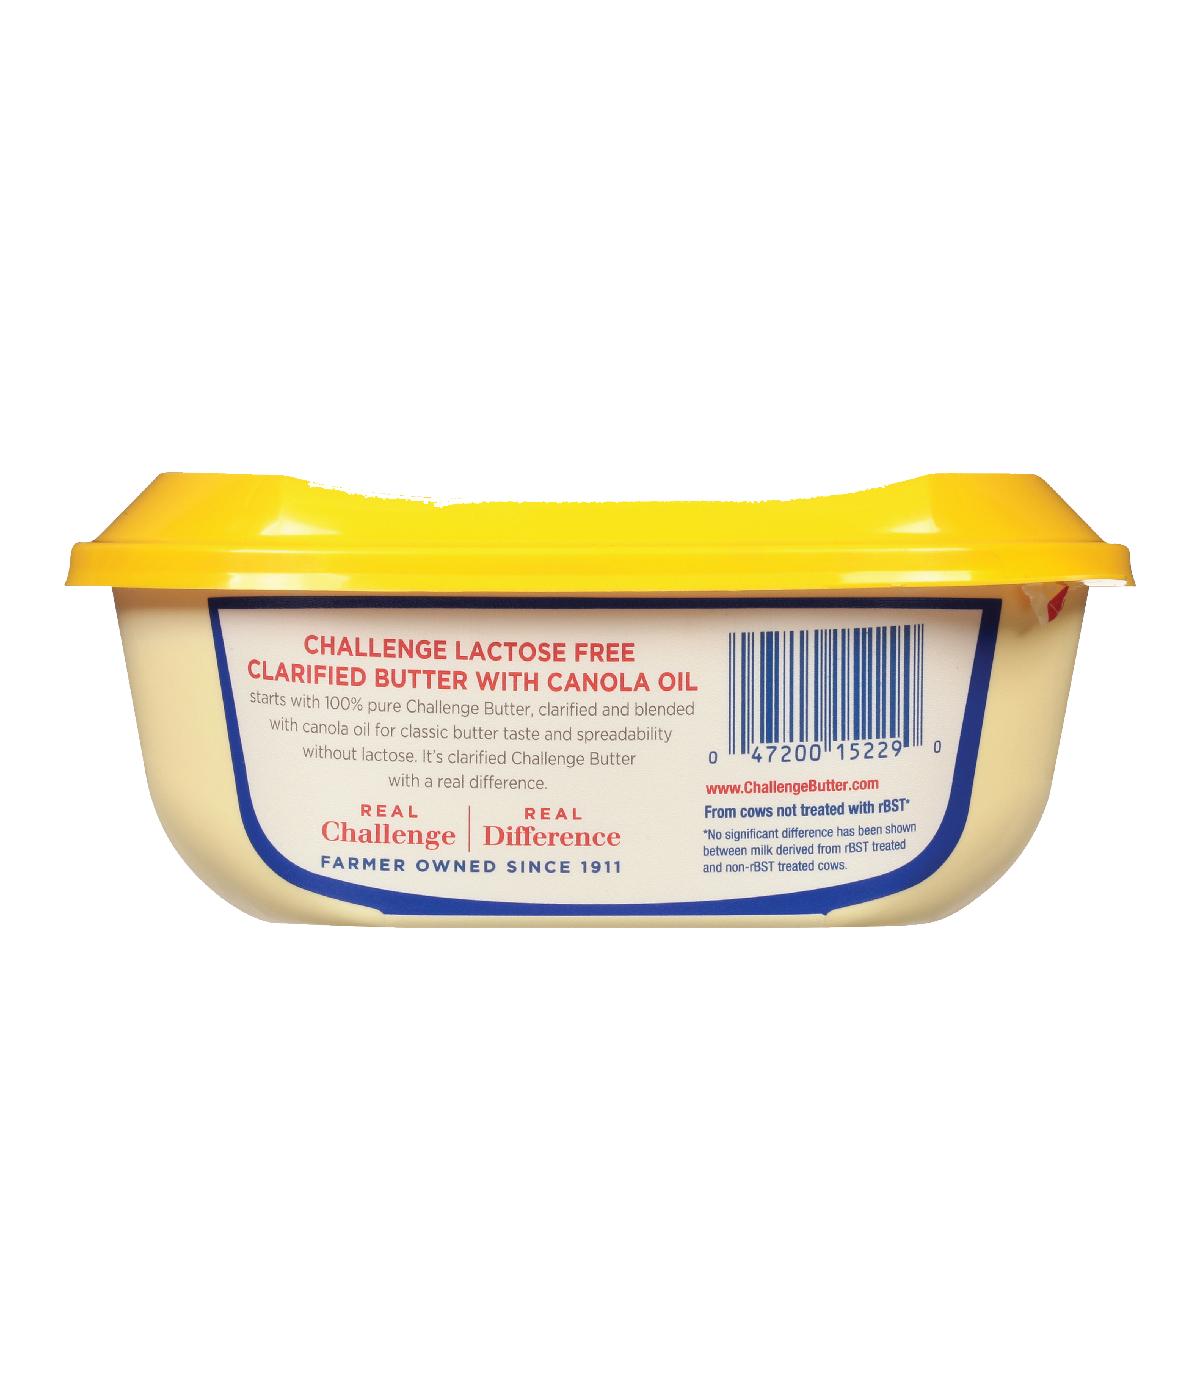 Challenge Lactose Free Spreadable Butter with Canola Oil; image 2 of 3